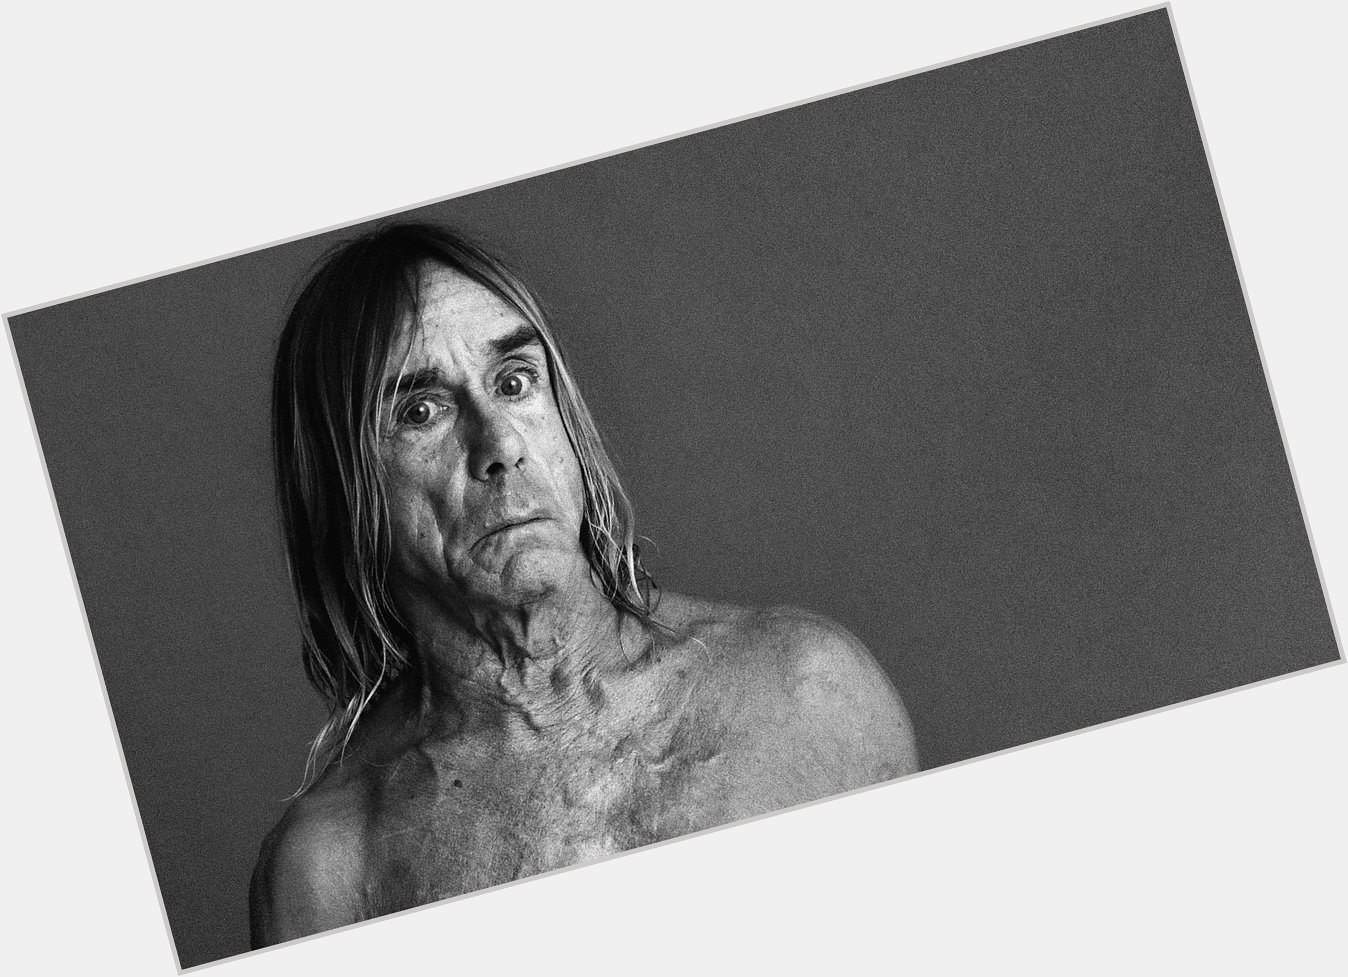 Happy 70th Birthday to IGGY POP. We should all be grateful he\s still on the planet and has a lust for life. 